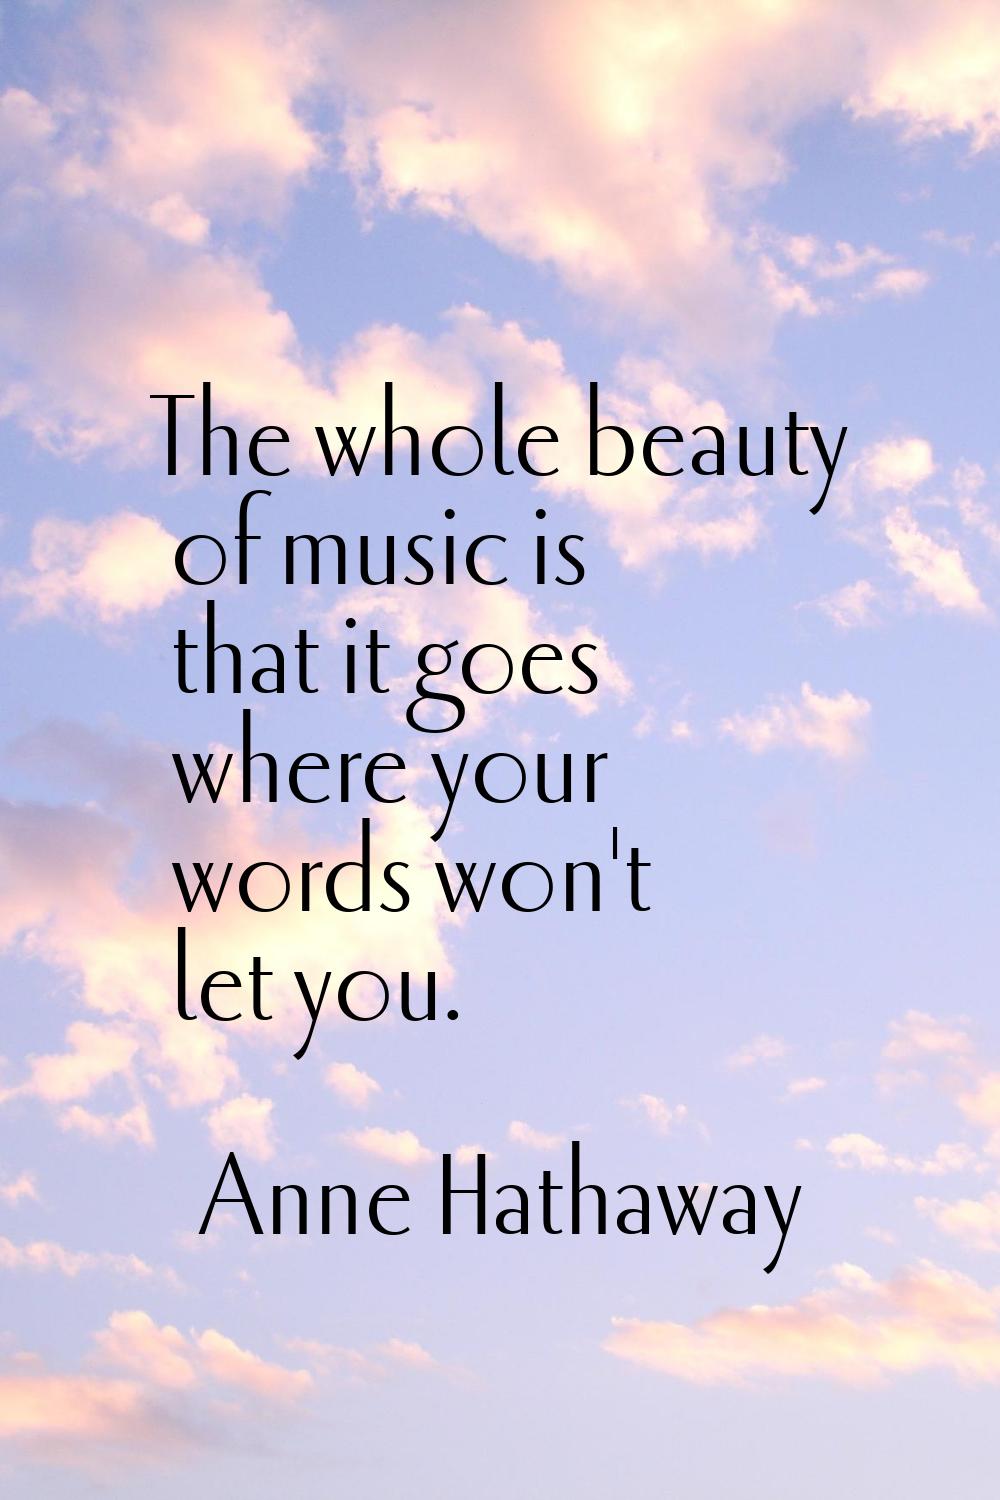 The whole beauty of music is that it goes where your words won't let you.